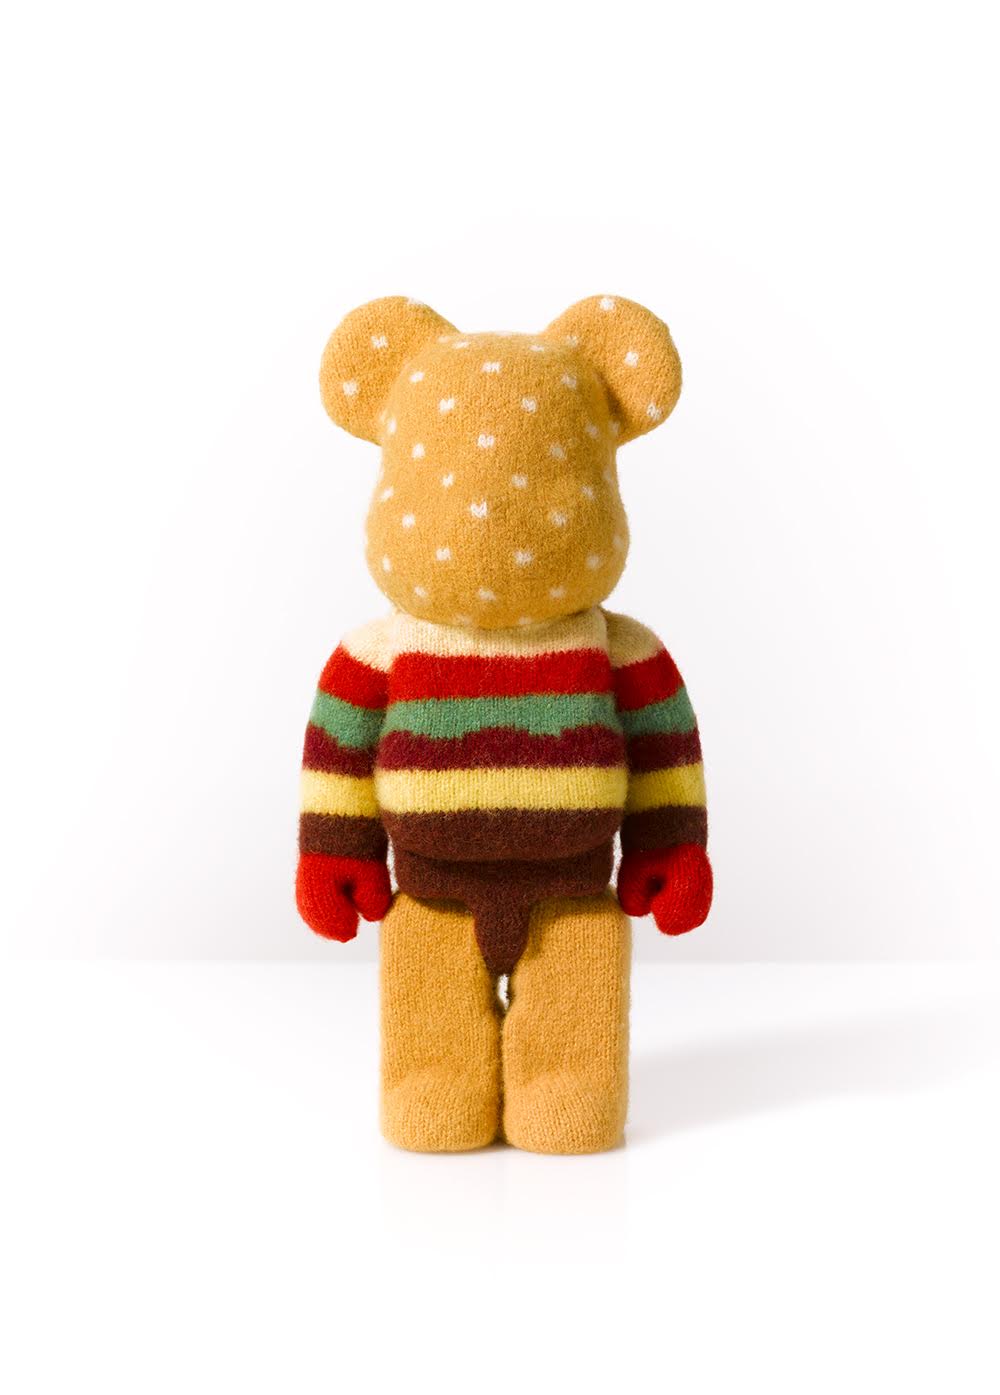 Gettry x Medicom Burger Bearbrick, 100% lambswool, photographed by David Sykes